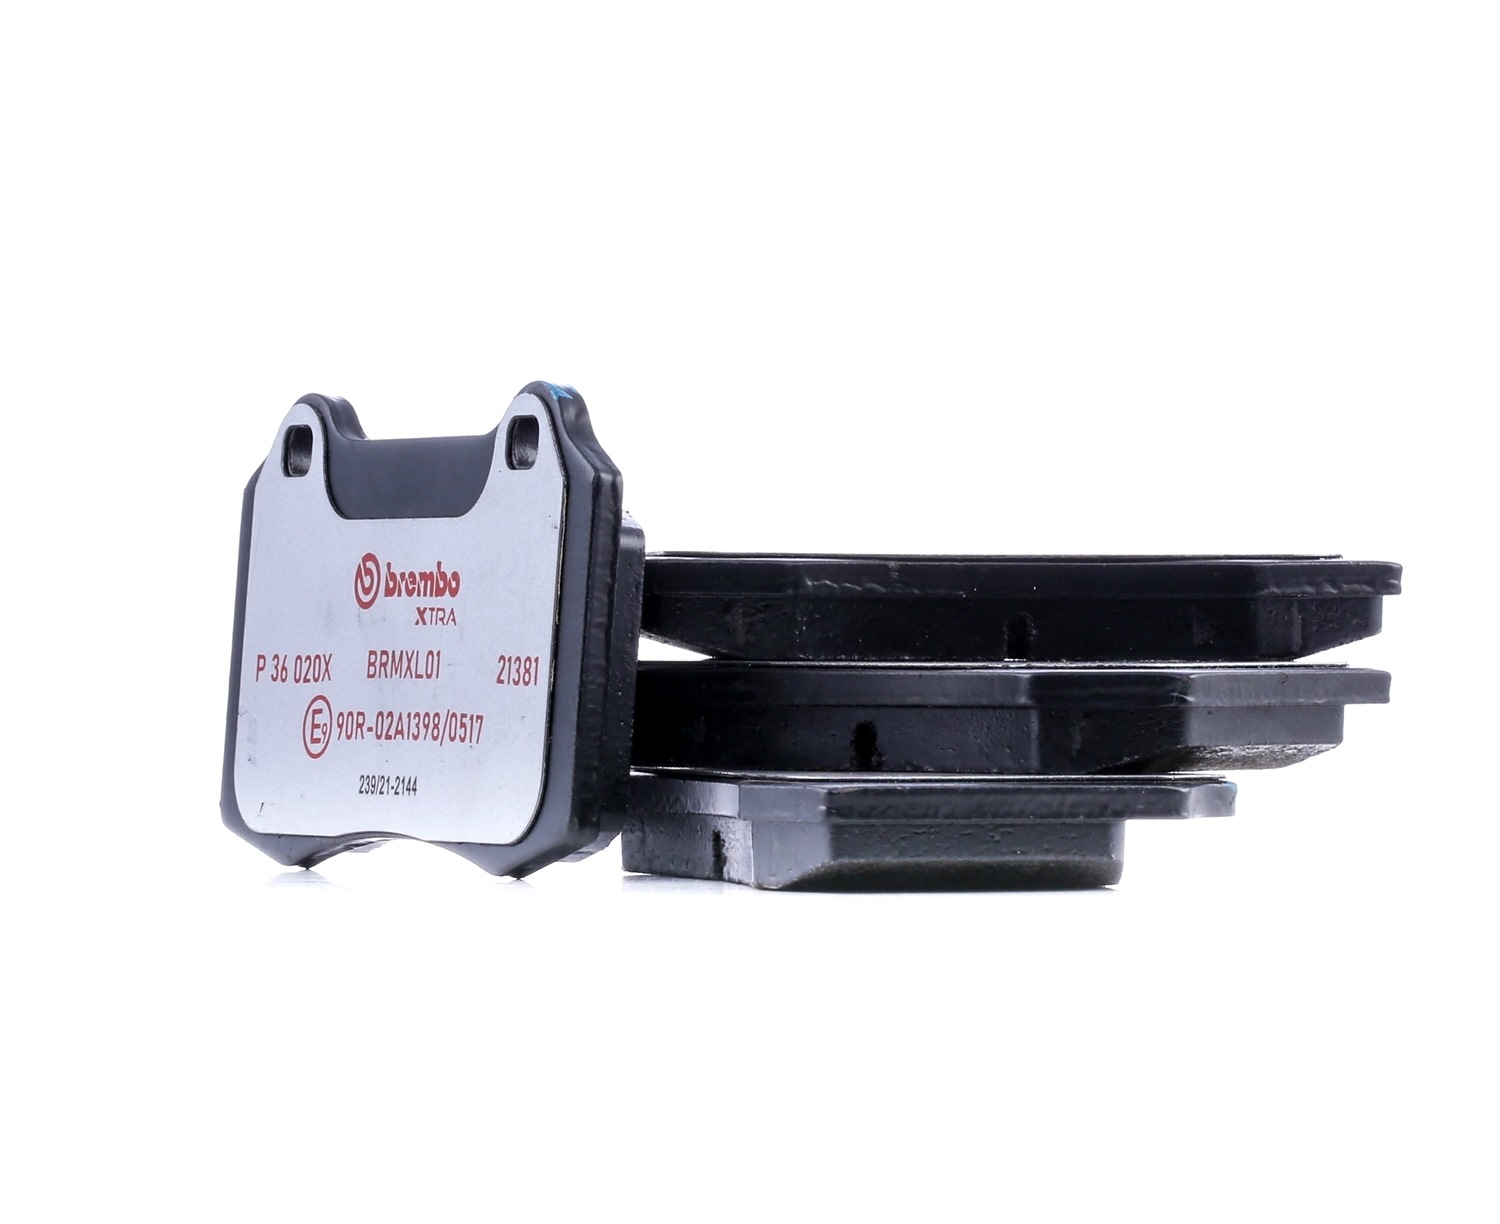 BREMBO P 36 020X Brake pad set excl. wear warning contact, without accessories